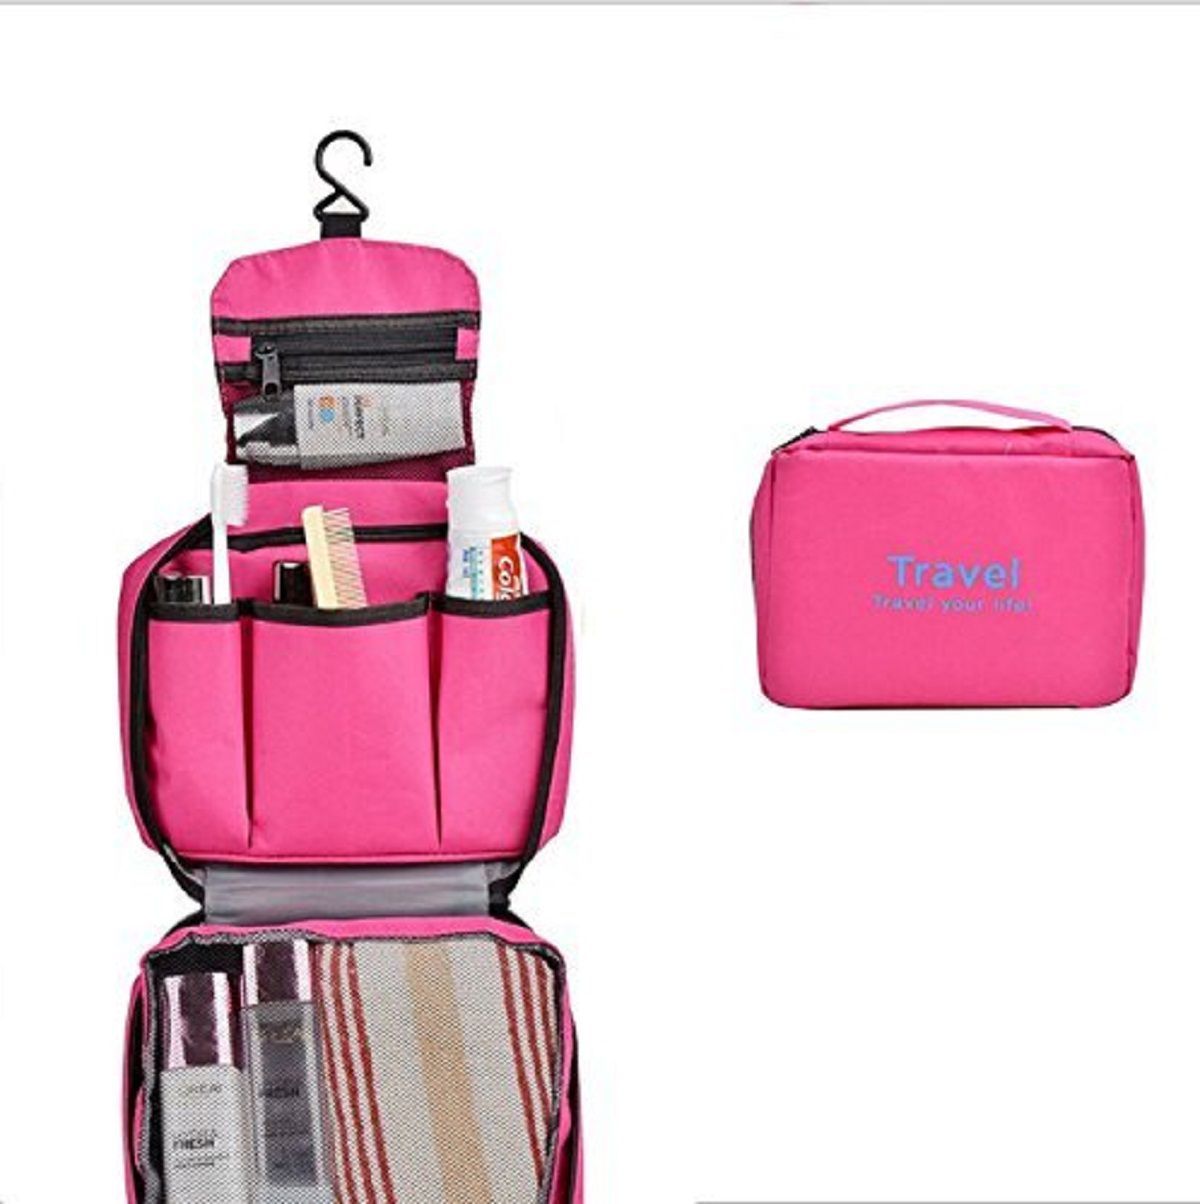 Everbuy Pink Travel Pouch Folding Wash Bag - Buy Everbuy Pink Travel ...